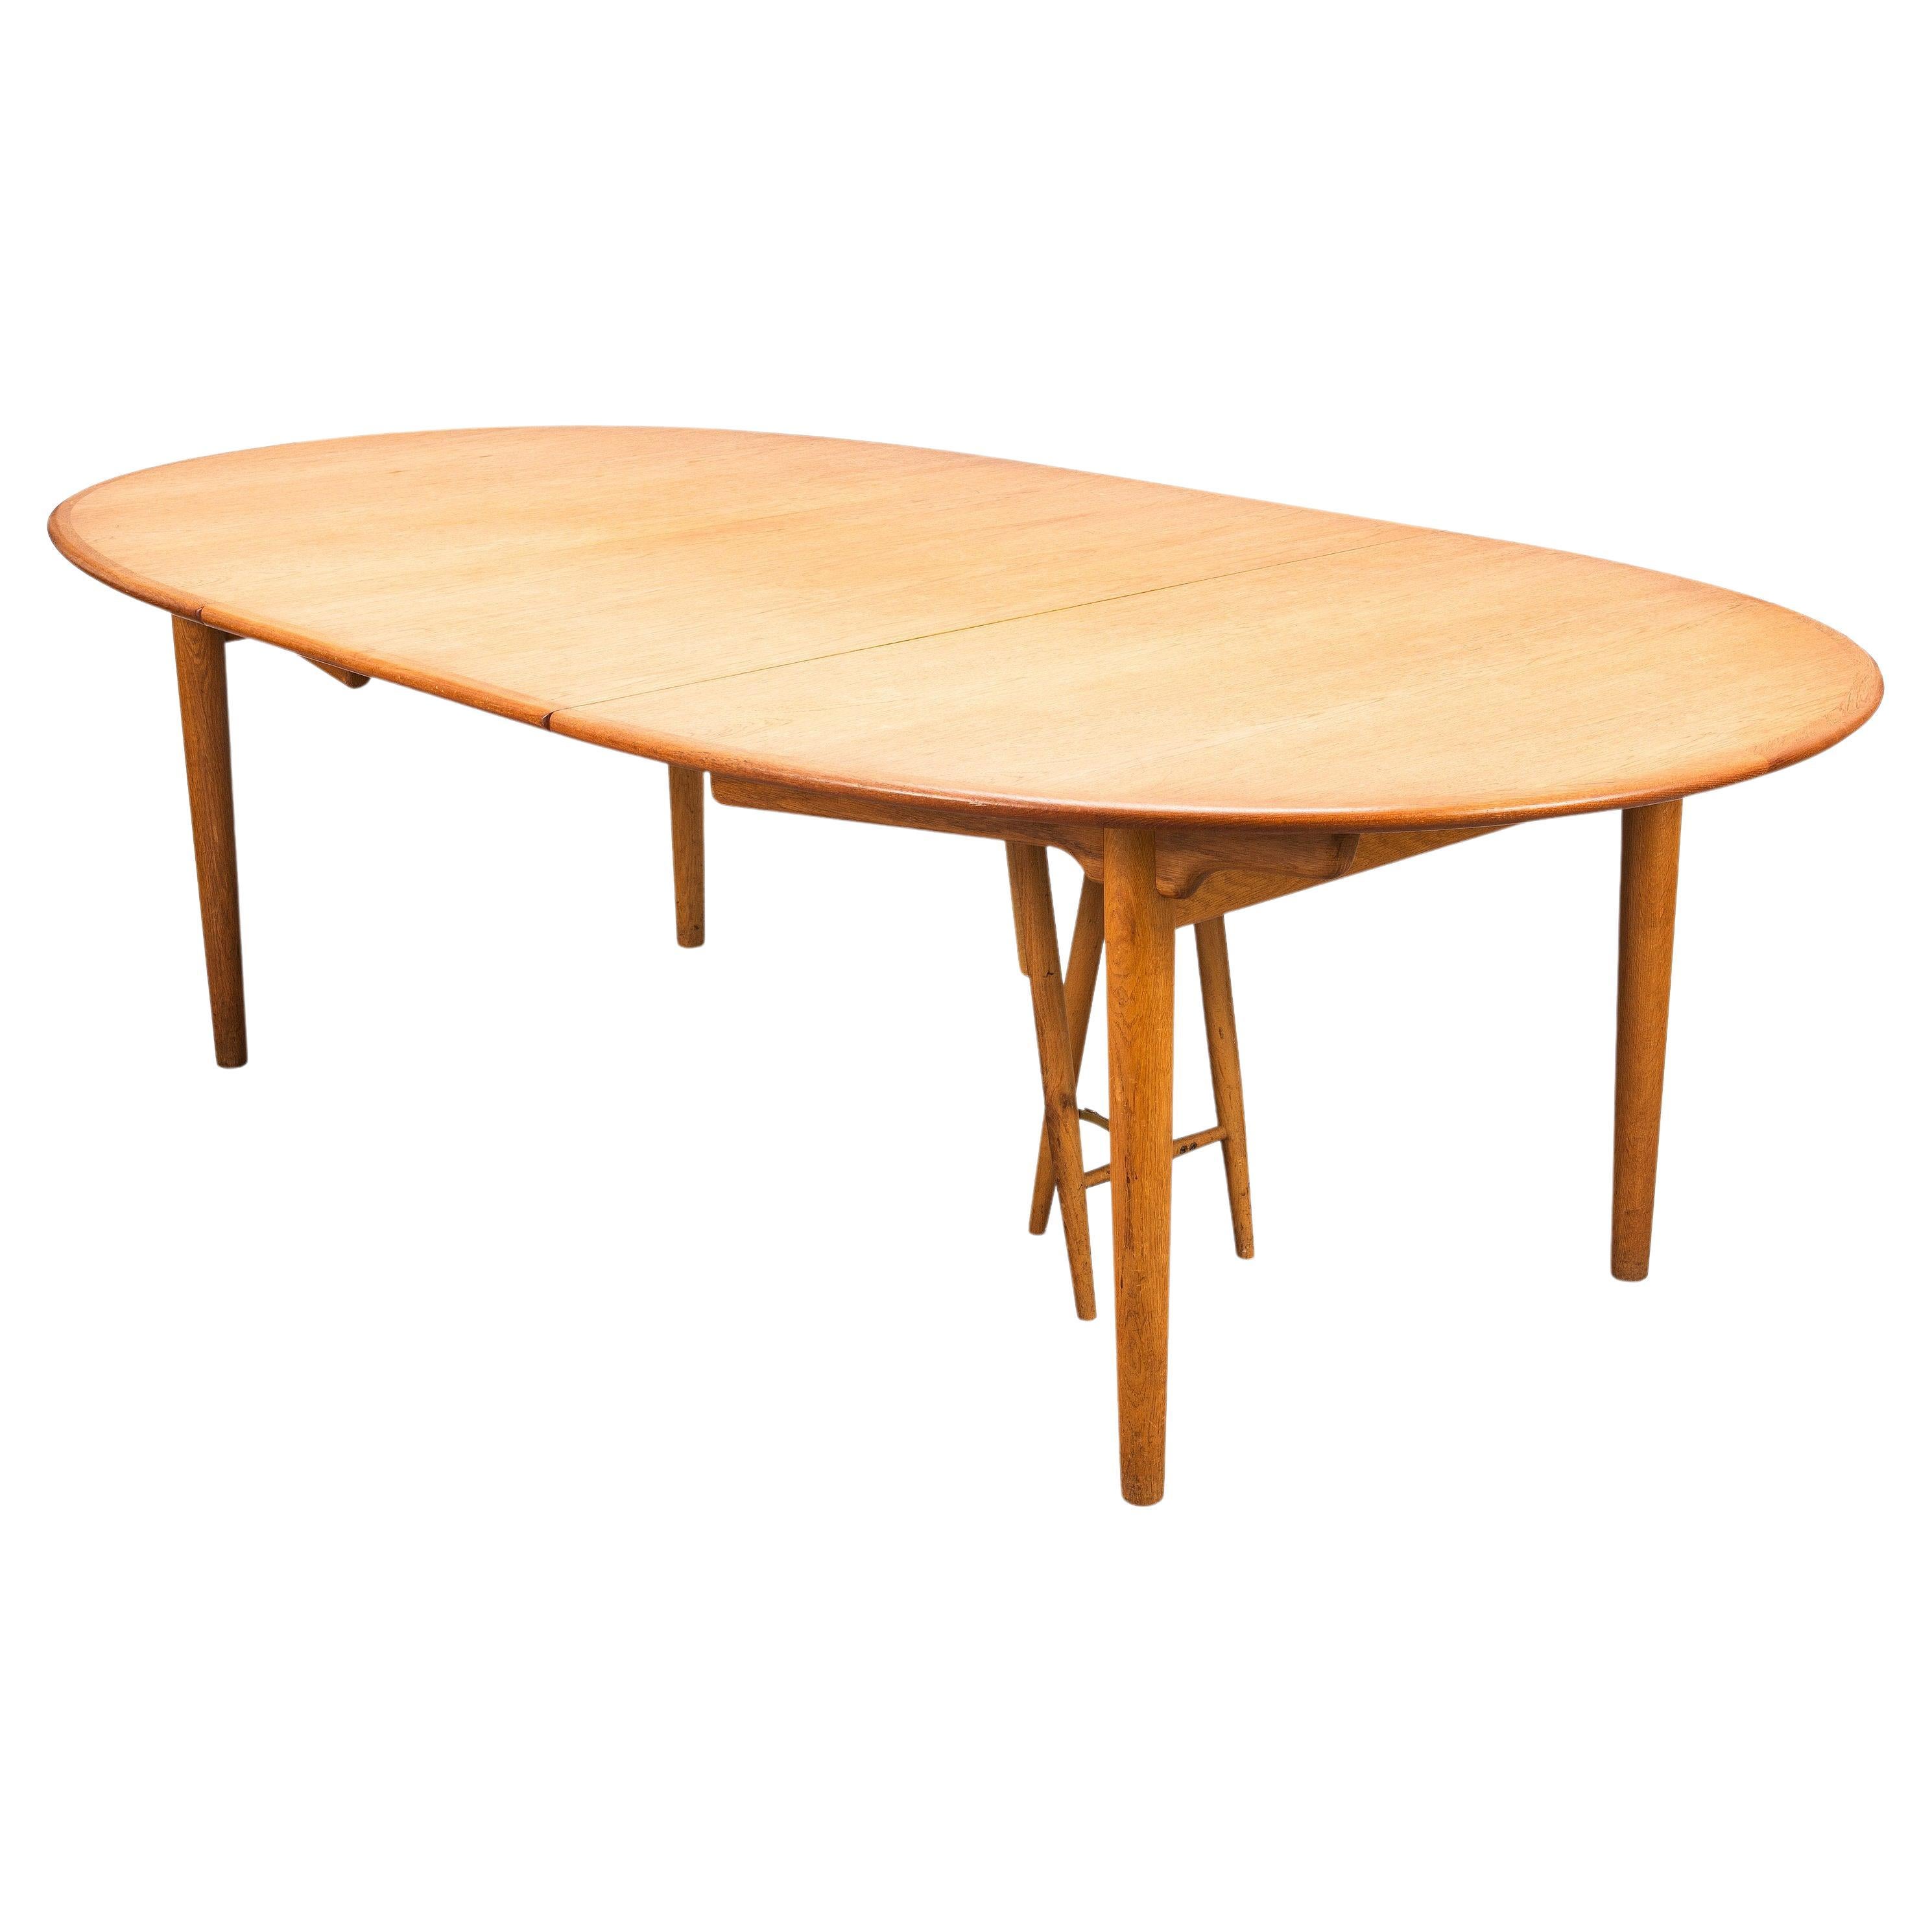 Hans J. Wegner oval table model JH567 for Johannes Andersen, extendable dining table solid oak, Denmark, 1950's. The oval tabletop has one additional leaf in order to expand the table from 178cm to 241.5 cm. Restored to eliminate glass rings and